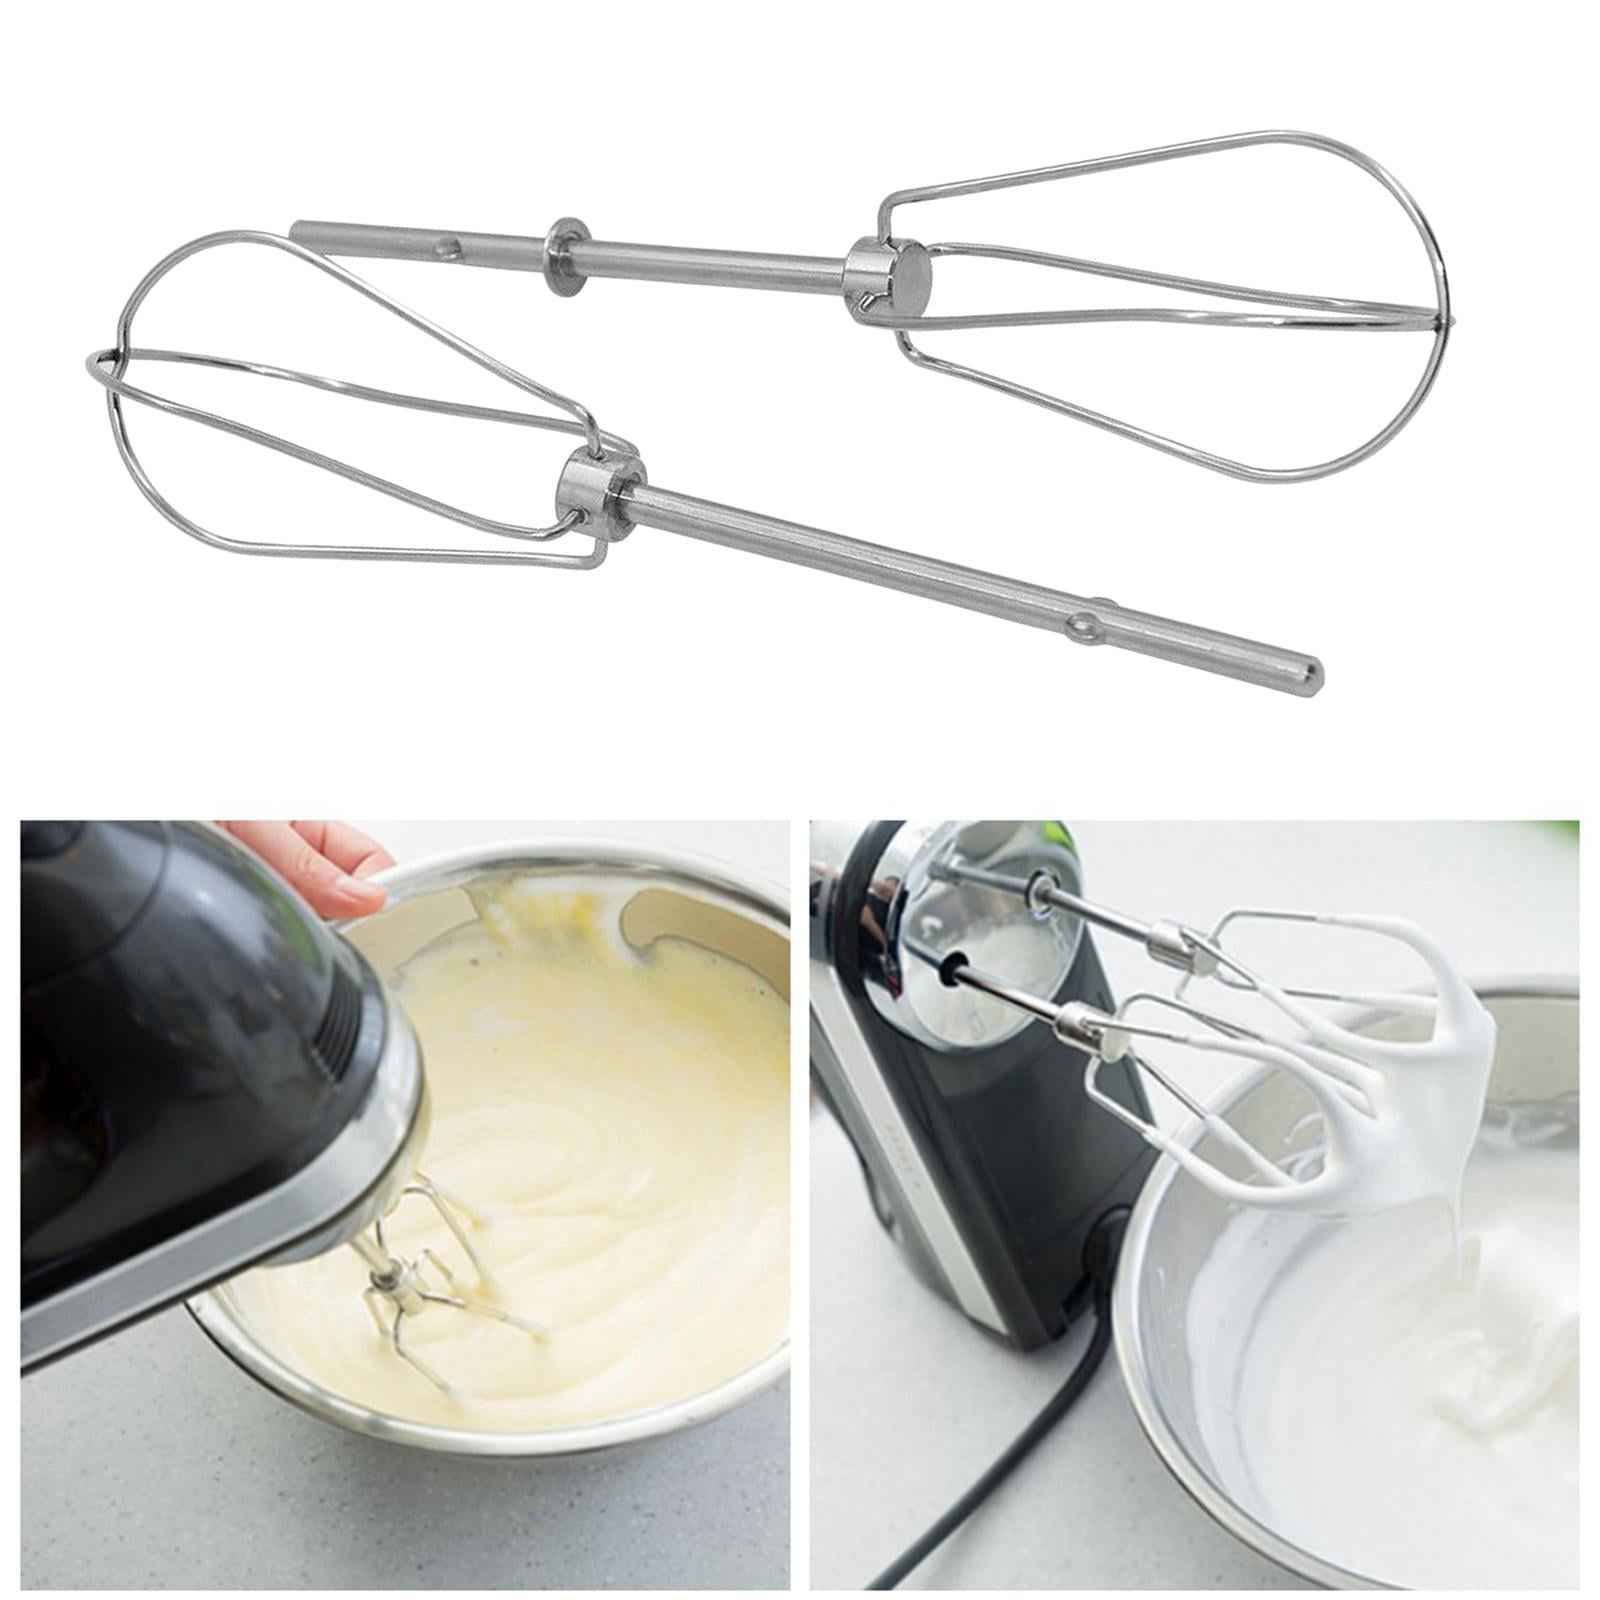 KHM2B W10490648 Hand Mixer Beater Set Replacement for Kenmore